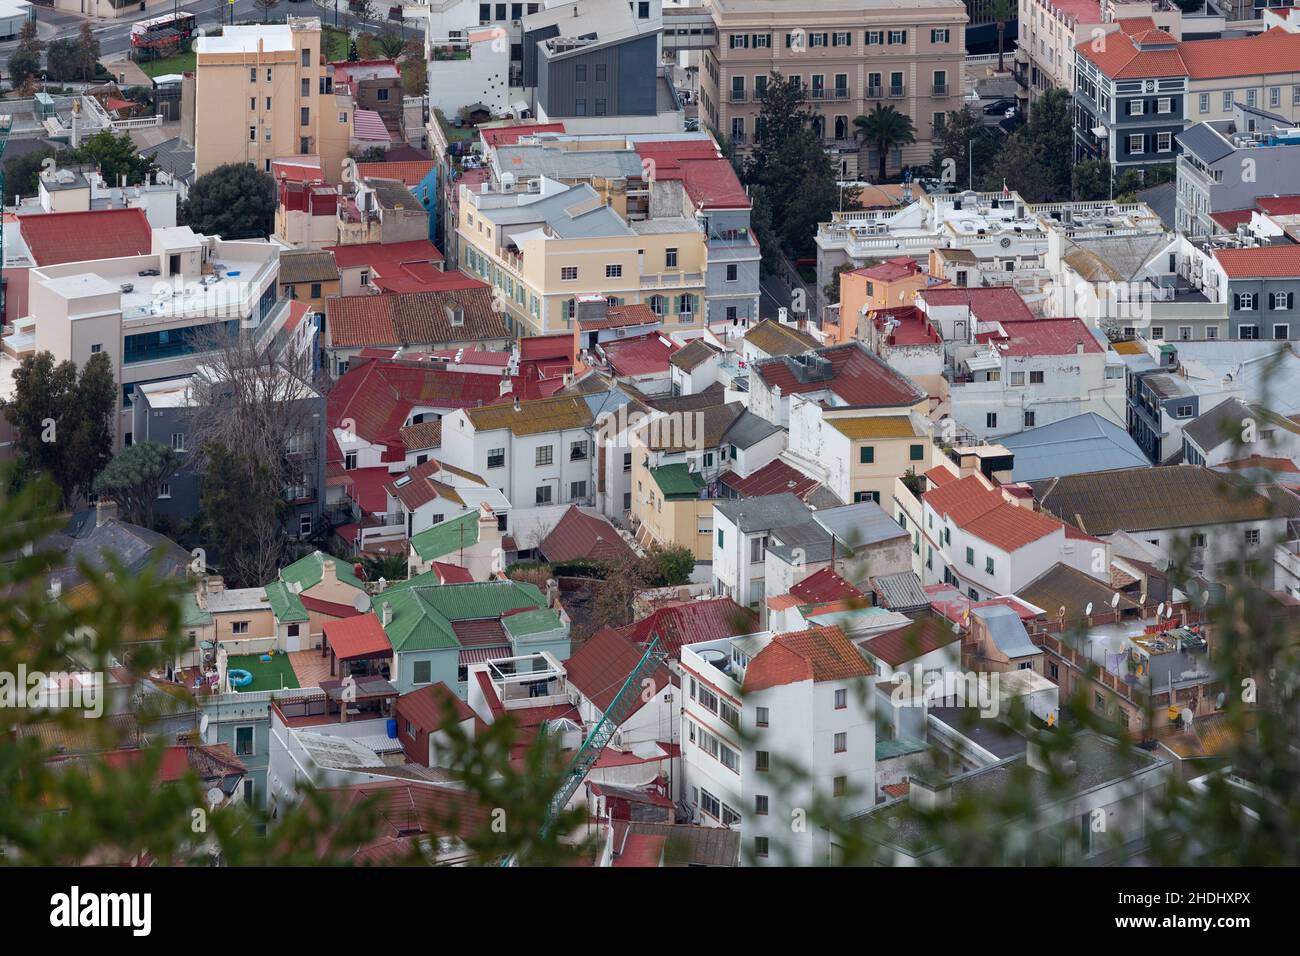 Gibraltar, United Kingdom - December 10, 2021: General view of the city of Gibraltar Stock Photo